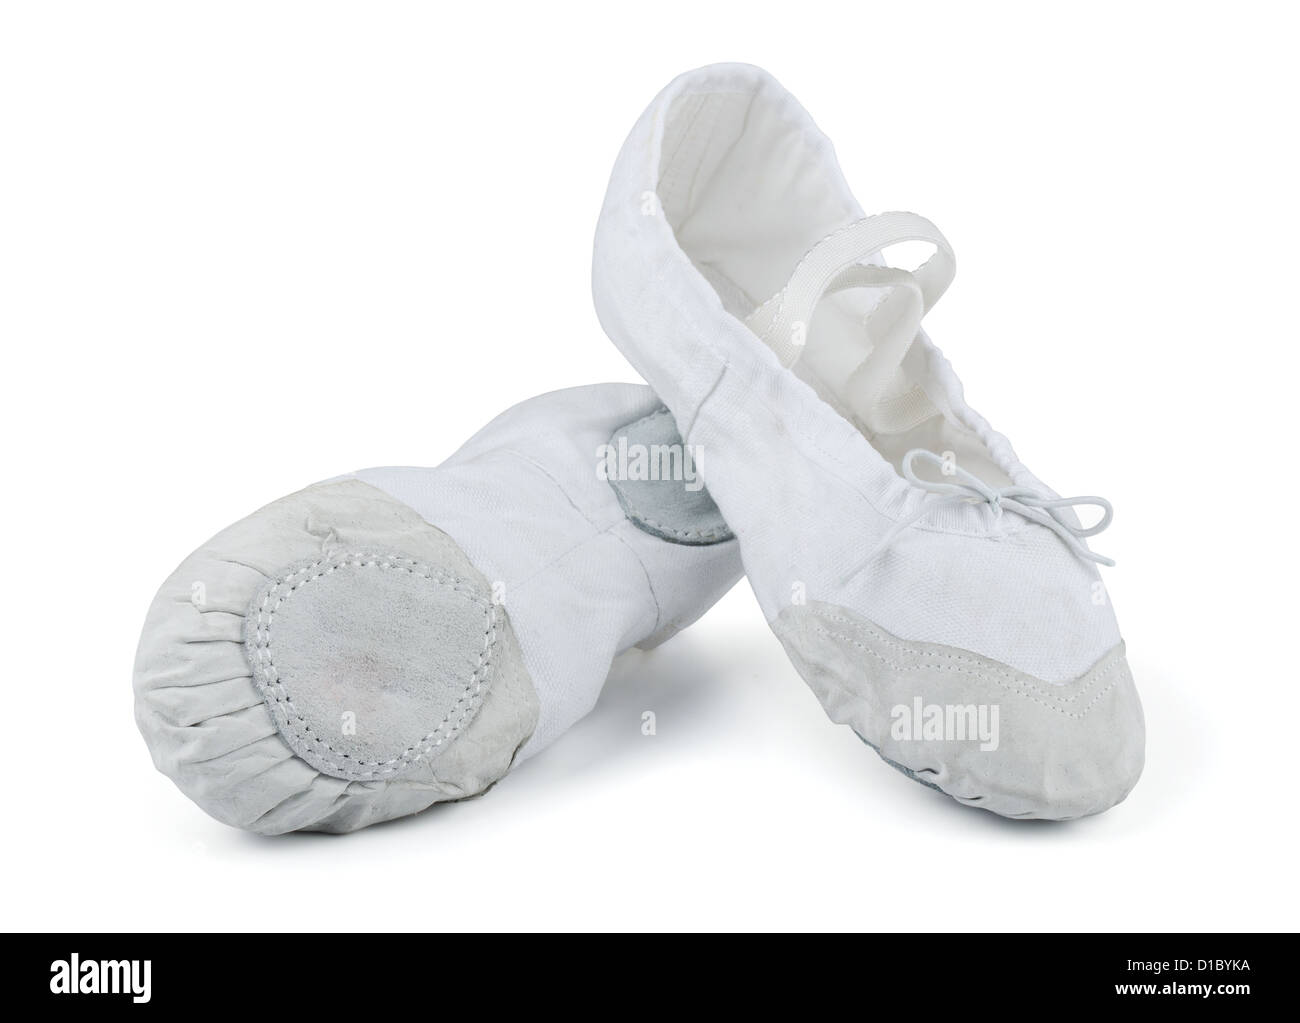 Pair of white ballet slippers isolated on white Stock Photo